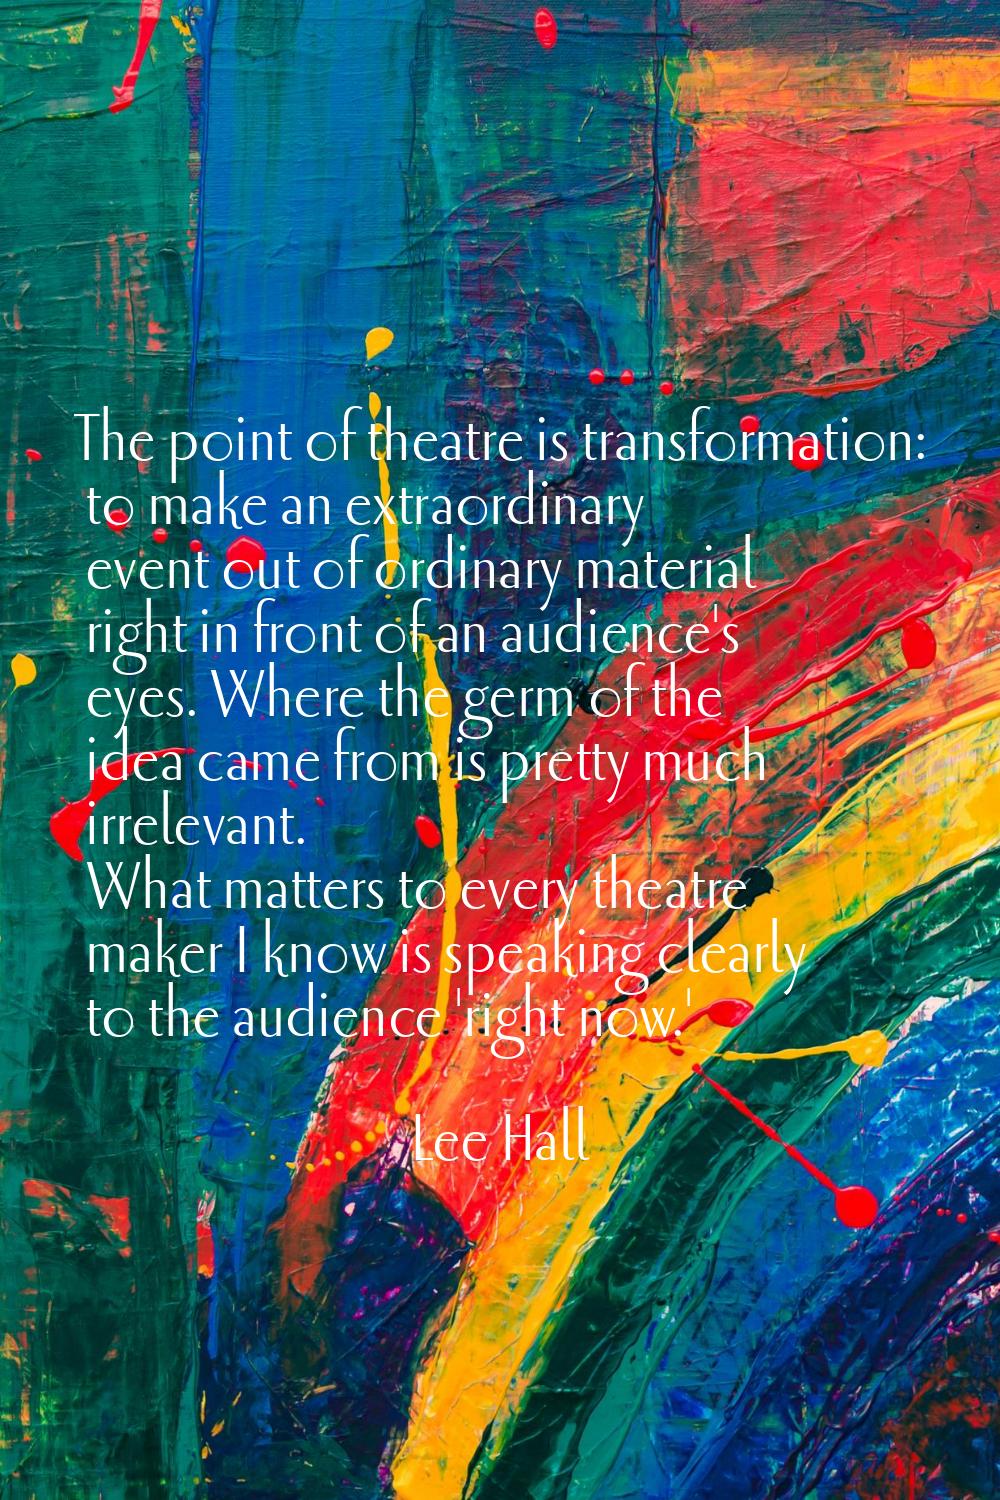 The point of theatre is transformation: to make an extraordinary event out of ordinary material rig